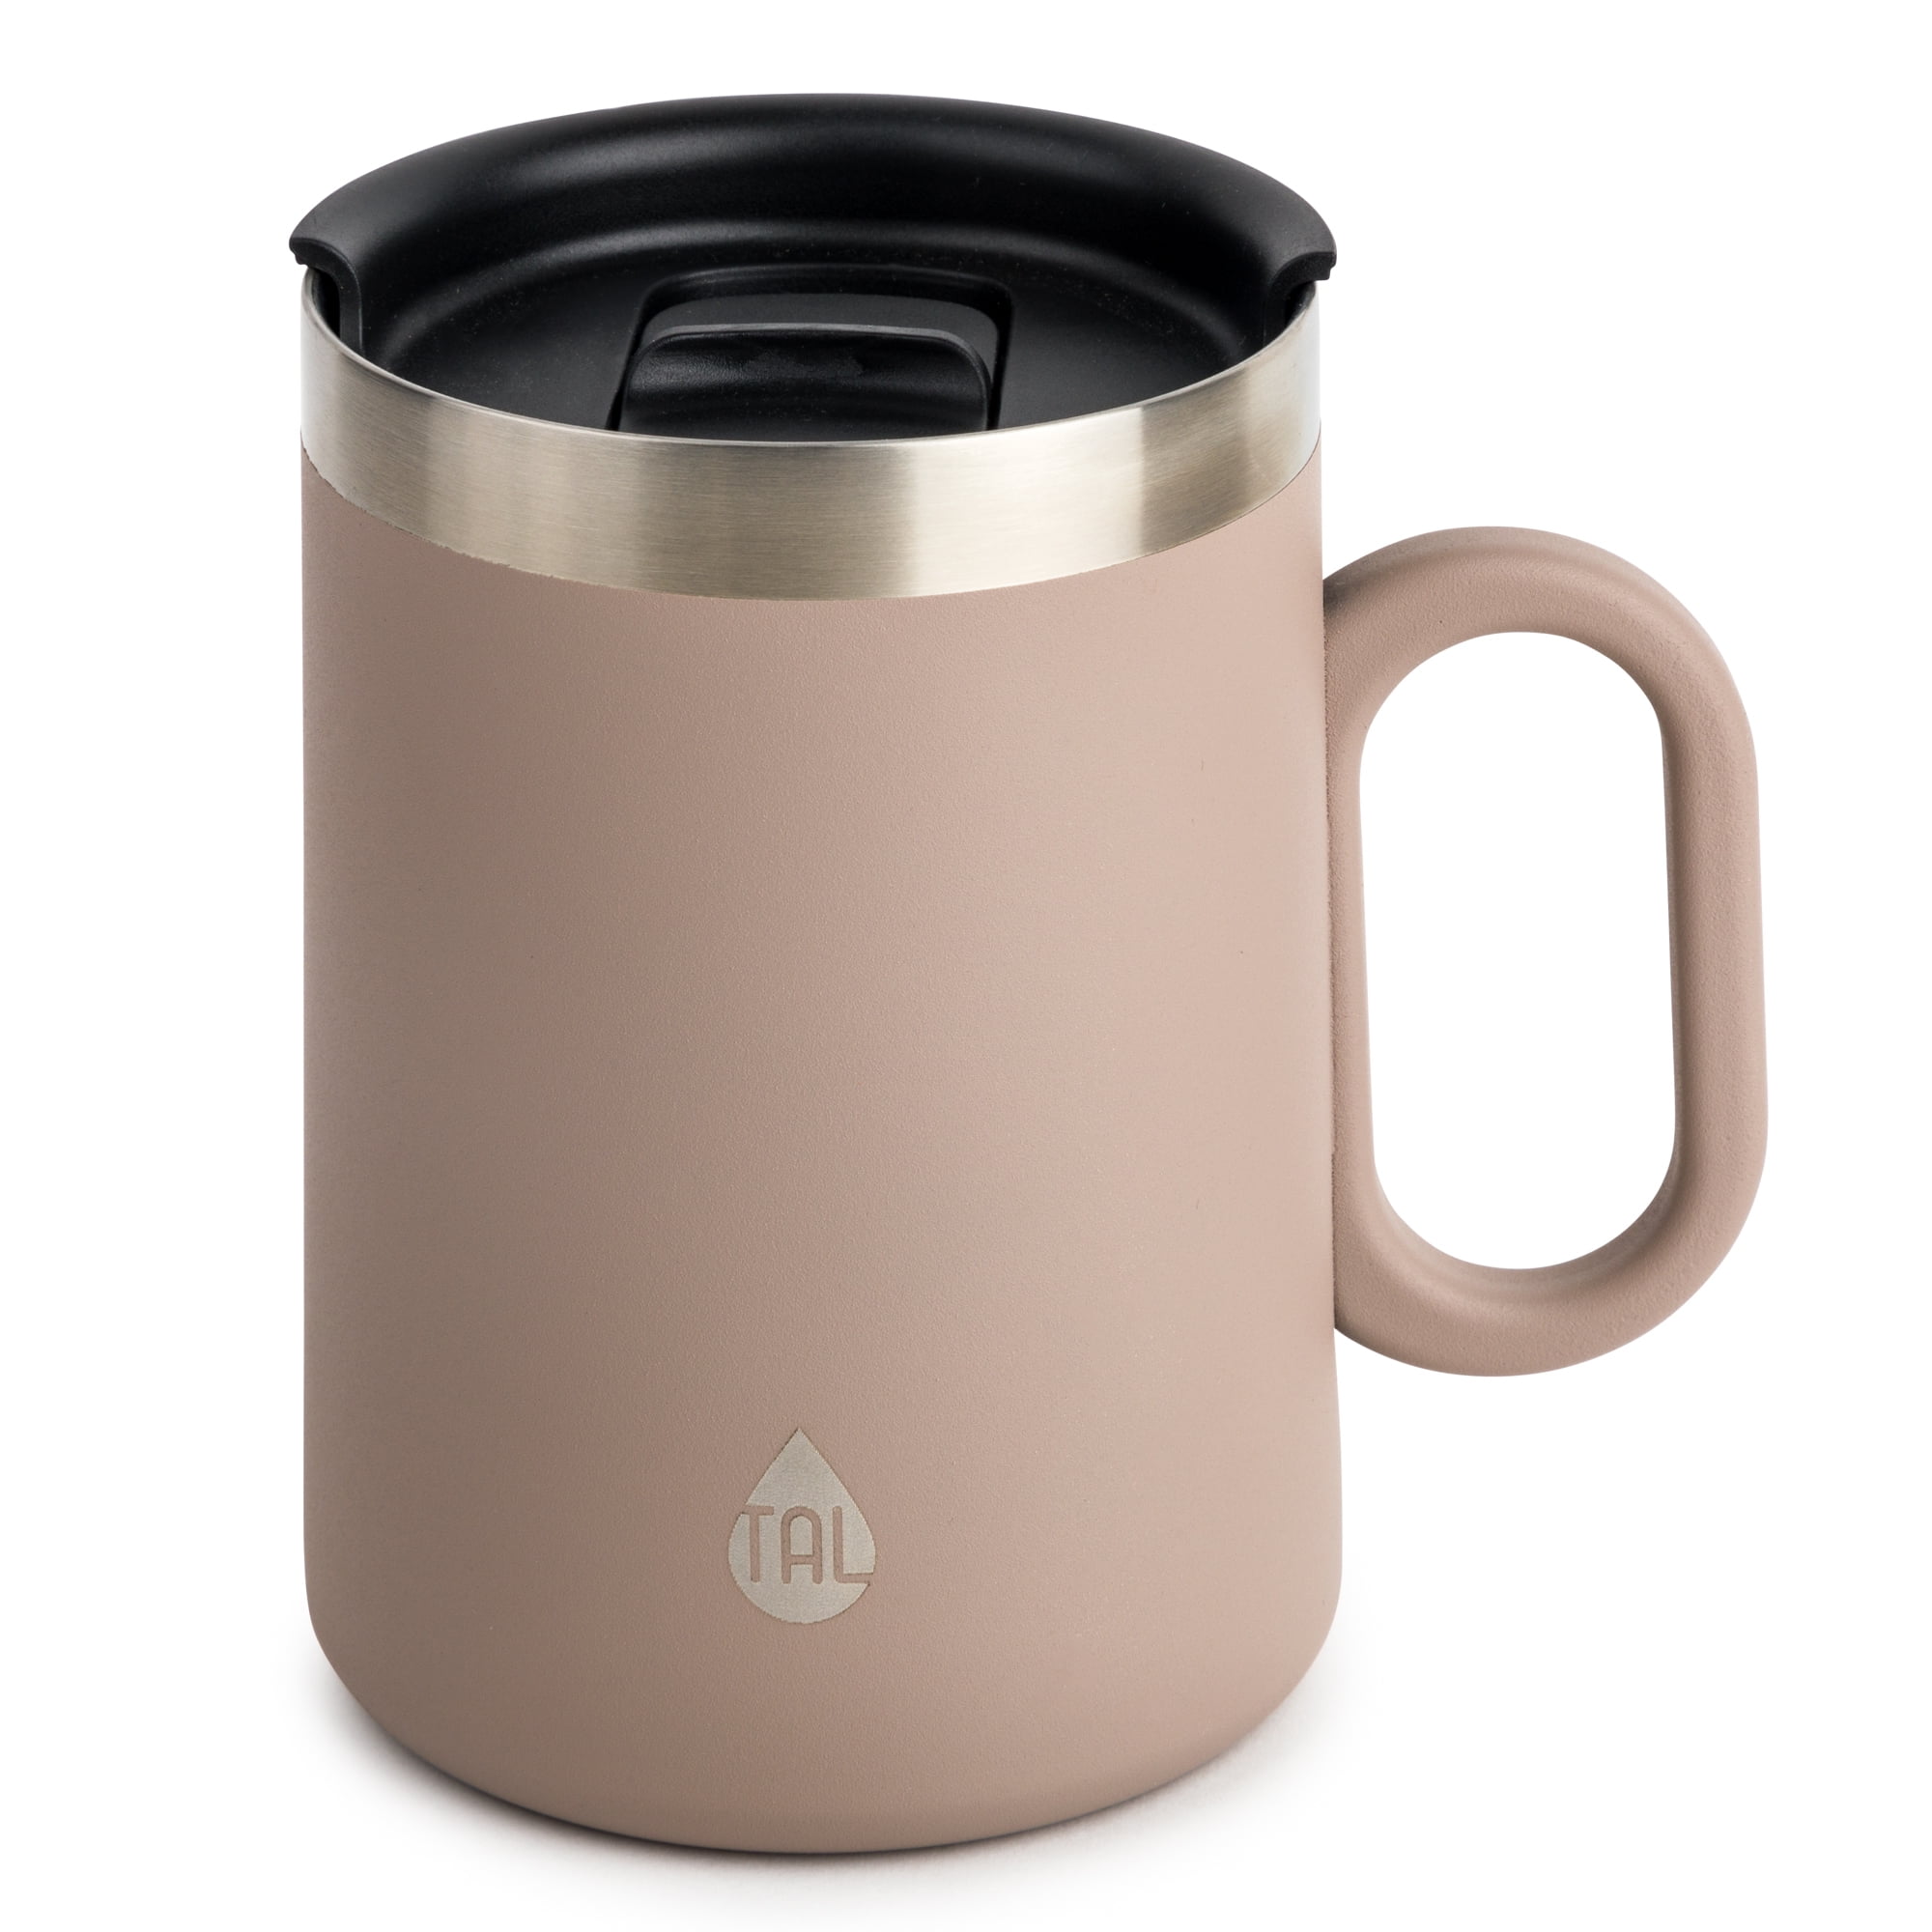 Insulated Stainless Steel Coffee Mug + Reviews, Crate & Barrel